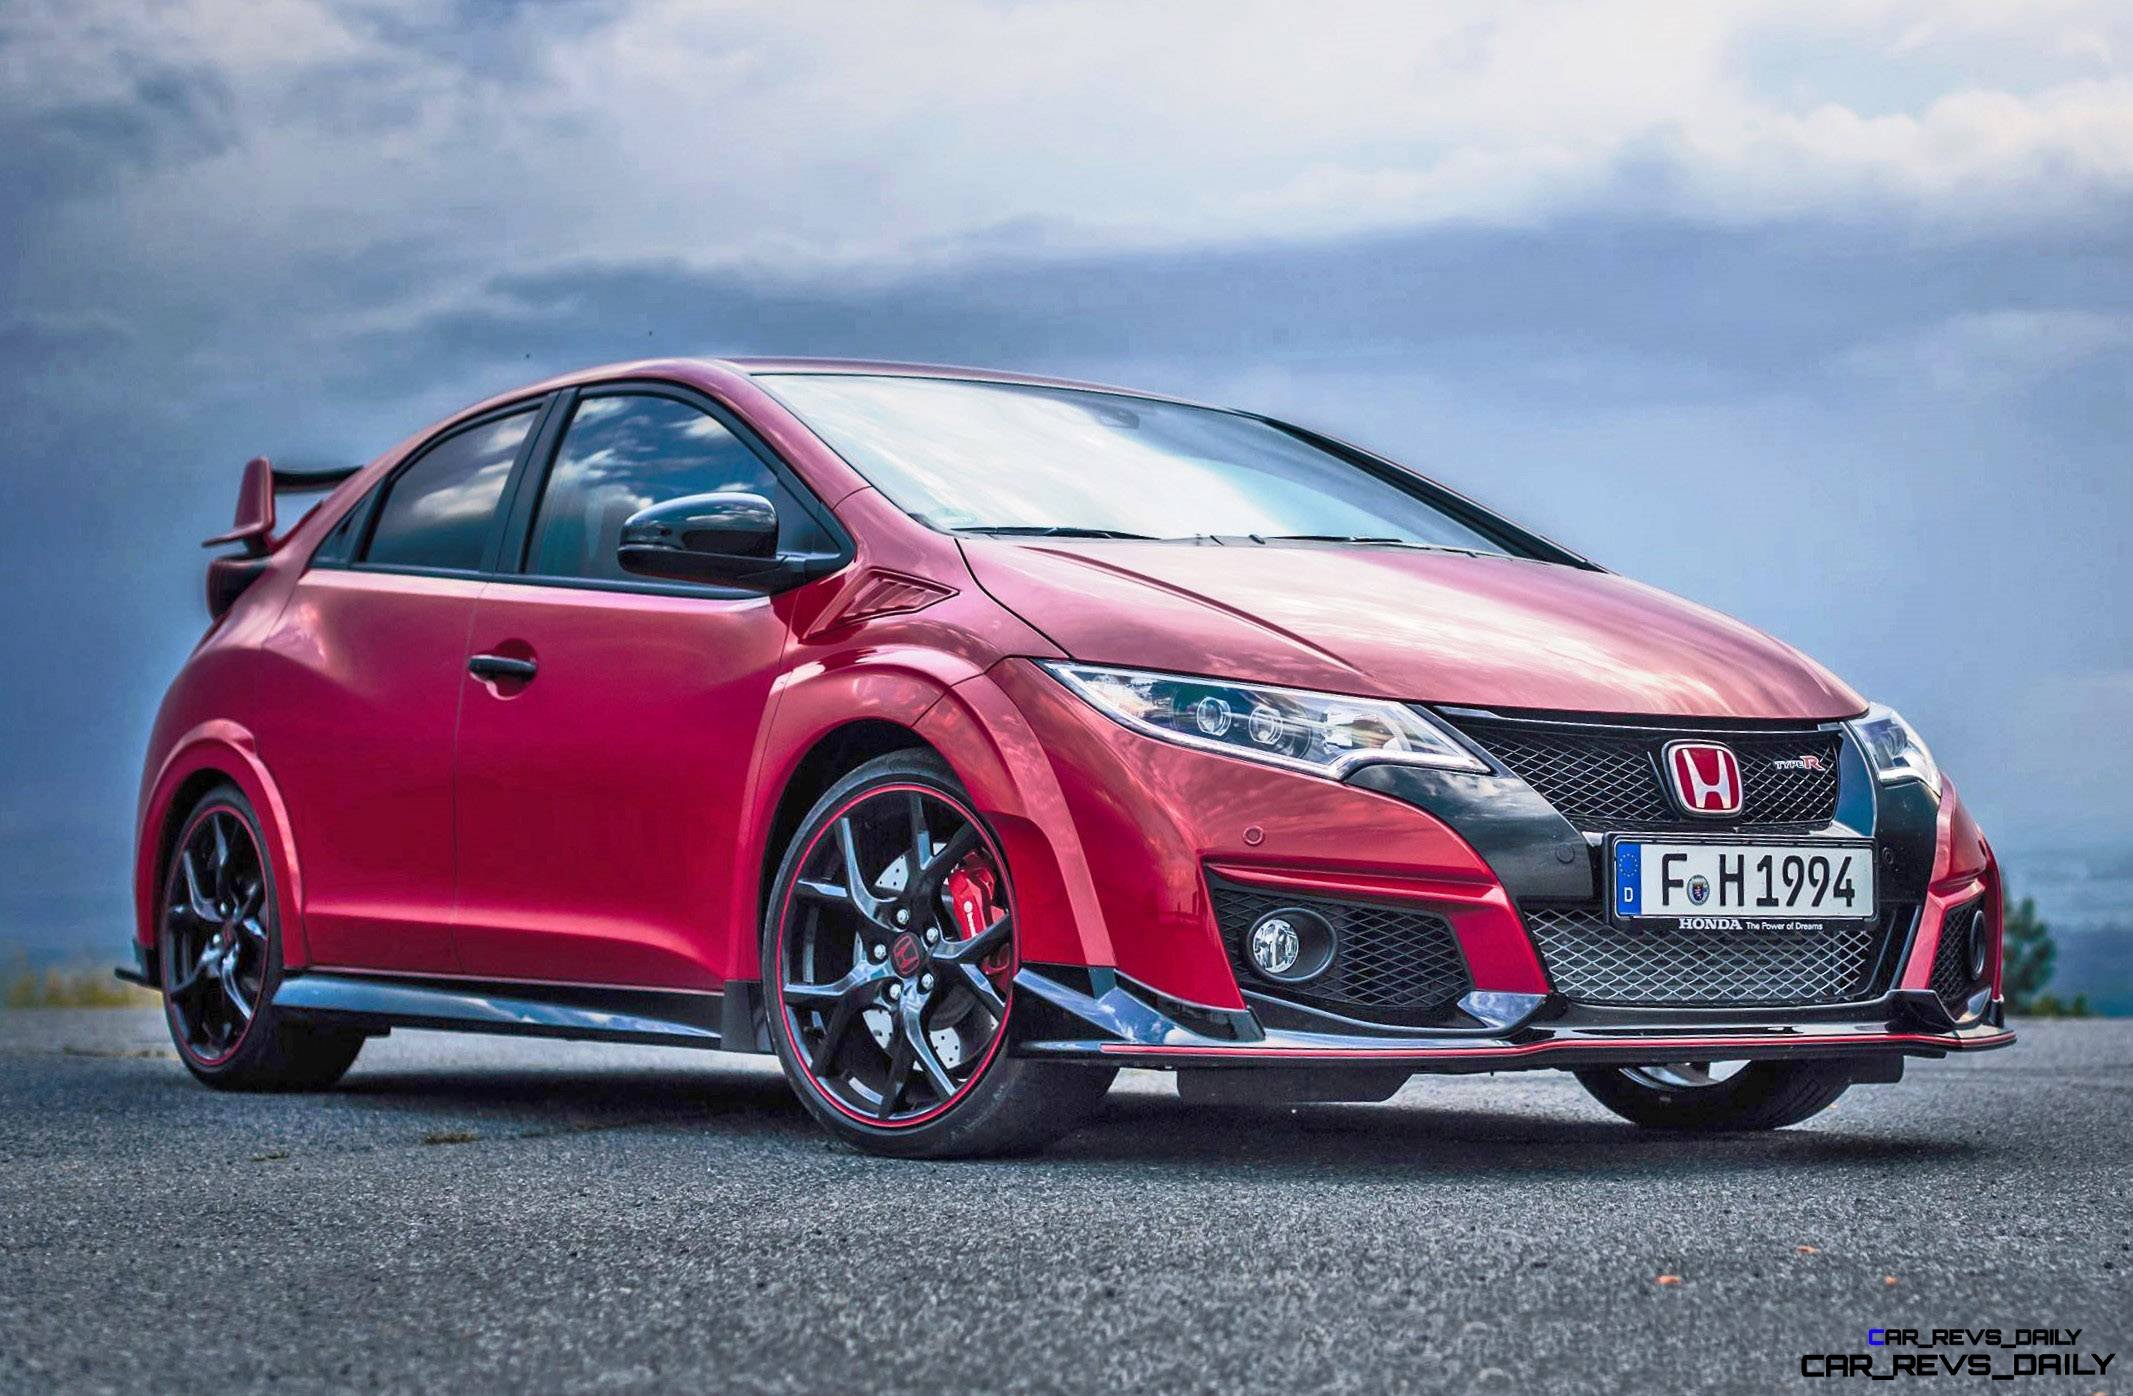 2015 Honda Civic Type R – European Launch Gallery in 104 Gorgeous